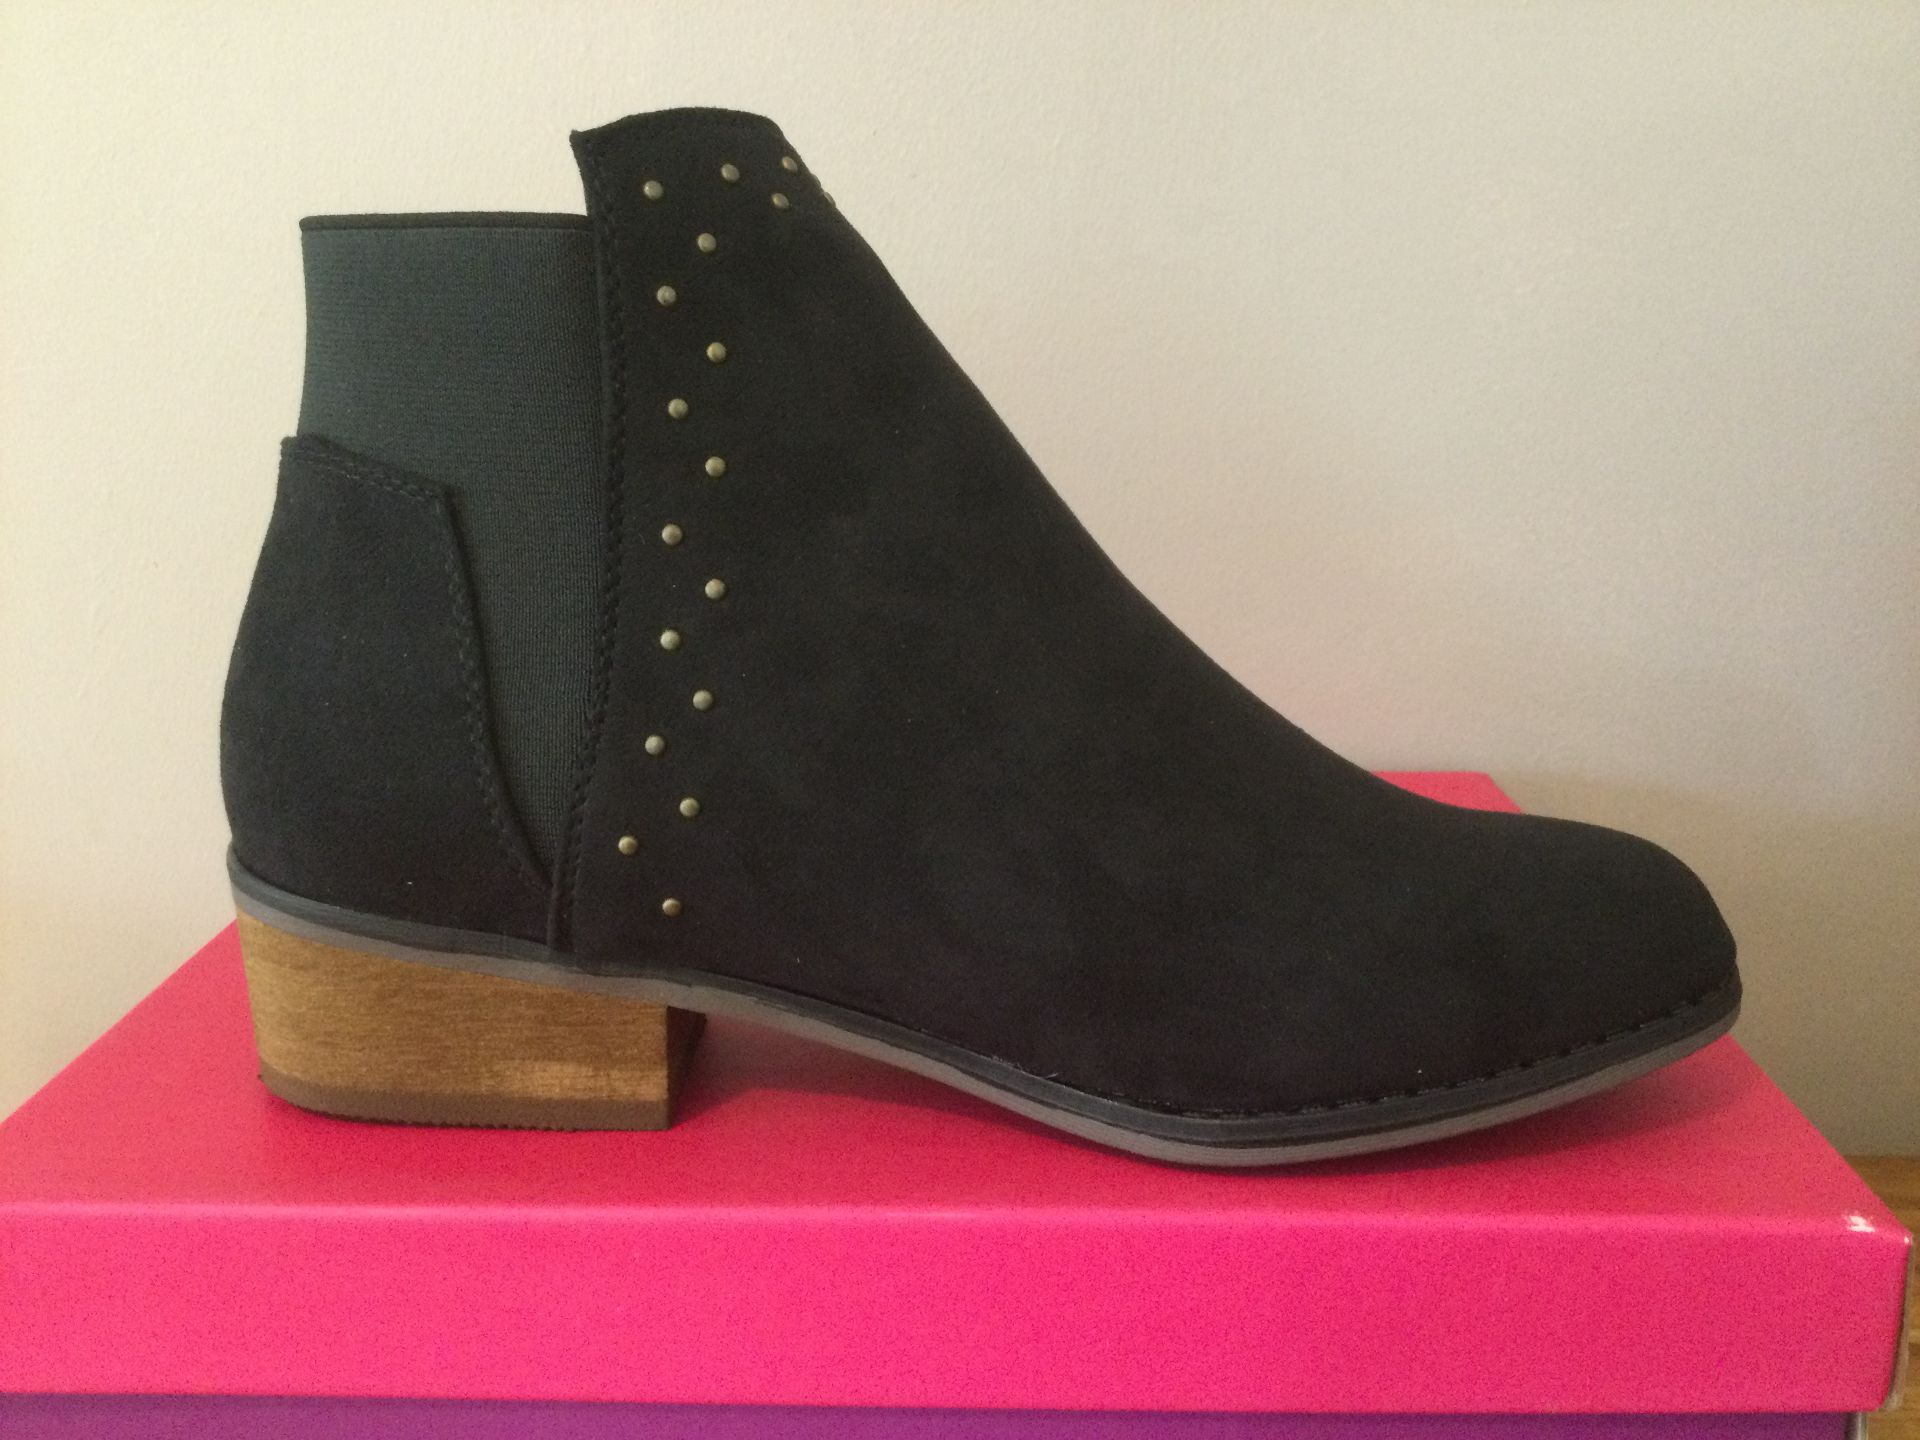 Dolcis “Wendy” Ankle Boots, Size 4, Black - New RRP £45.00 - Image 2 of 6